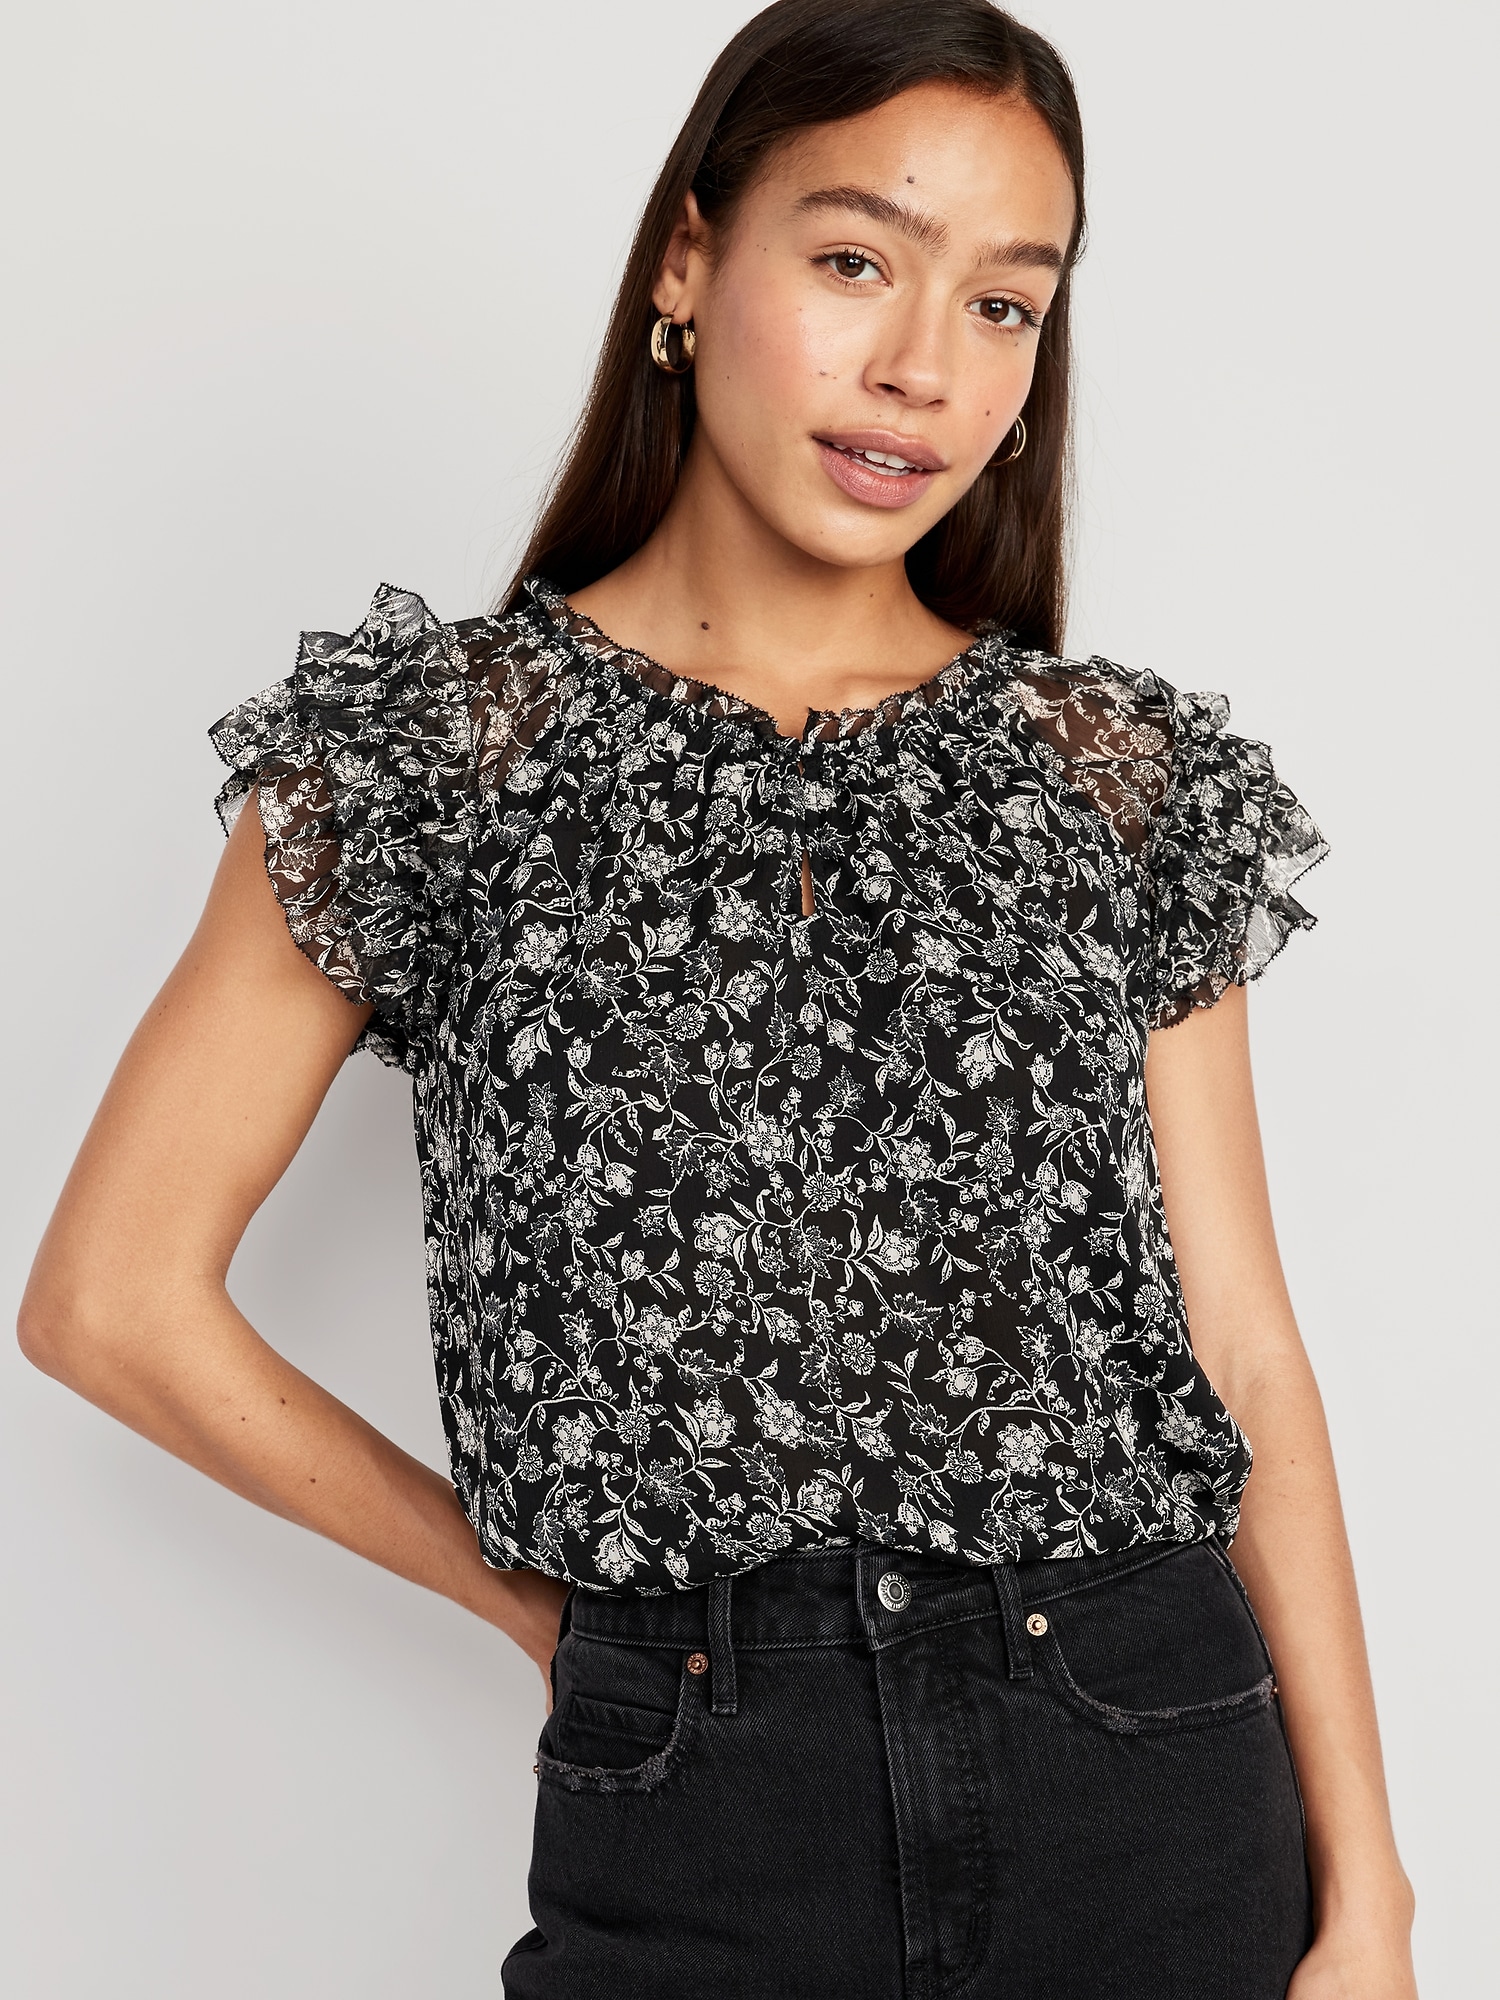 Ruffle-Trim Smocked Top | Old Navy